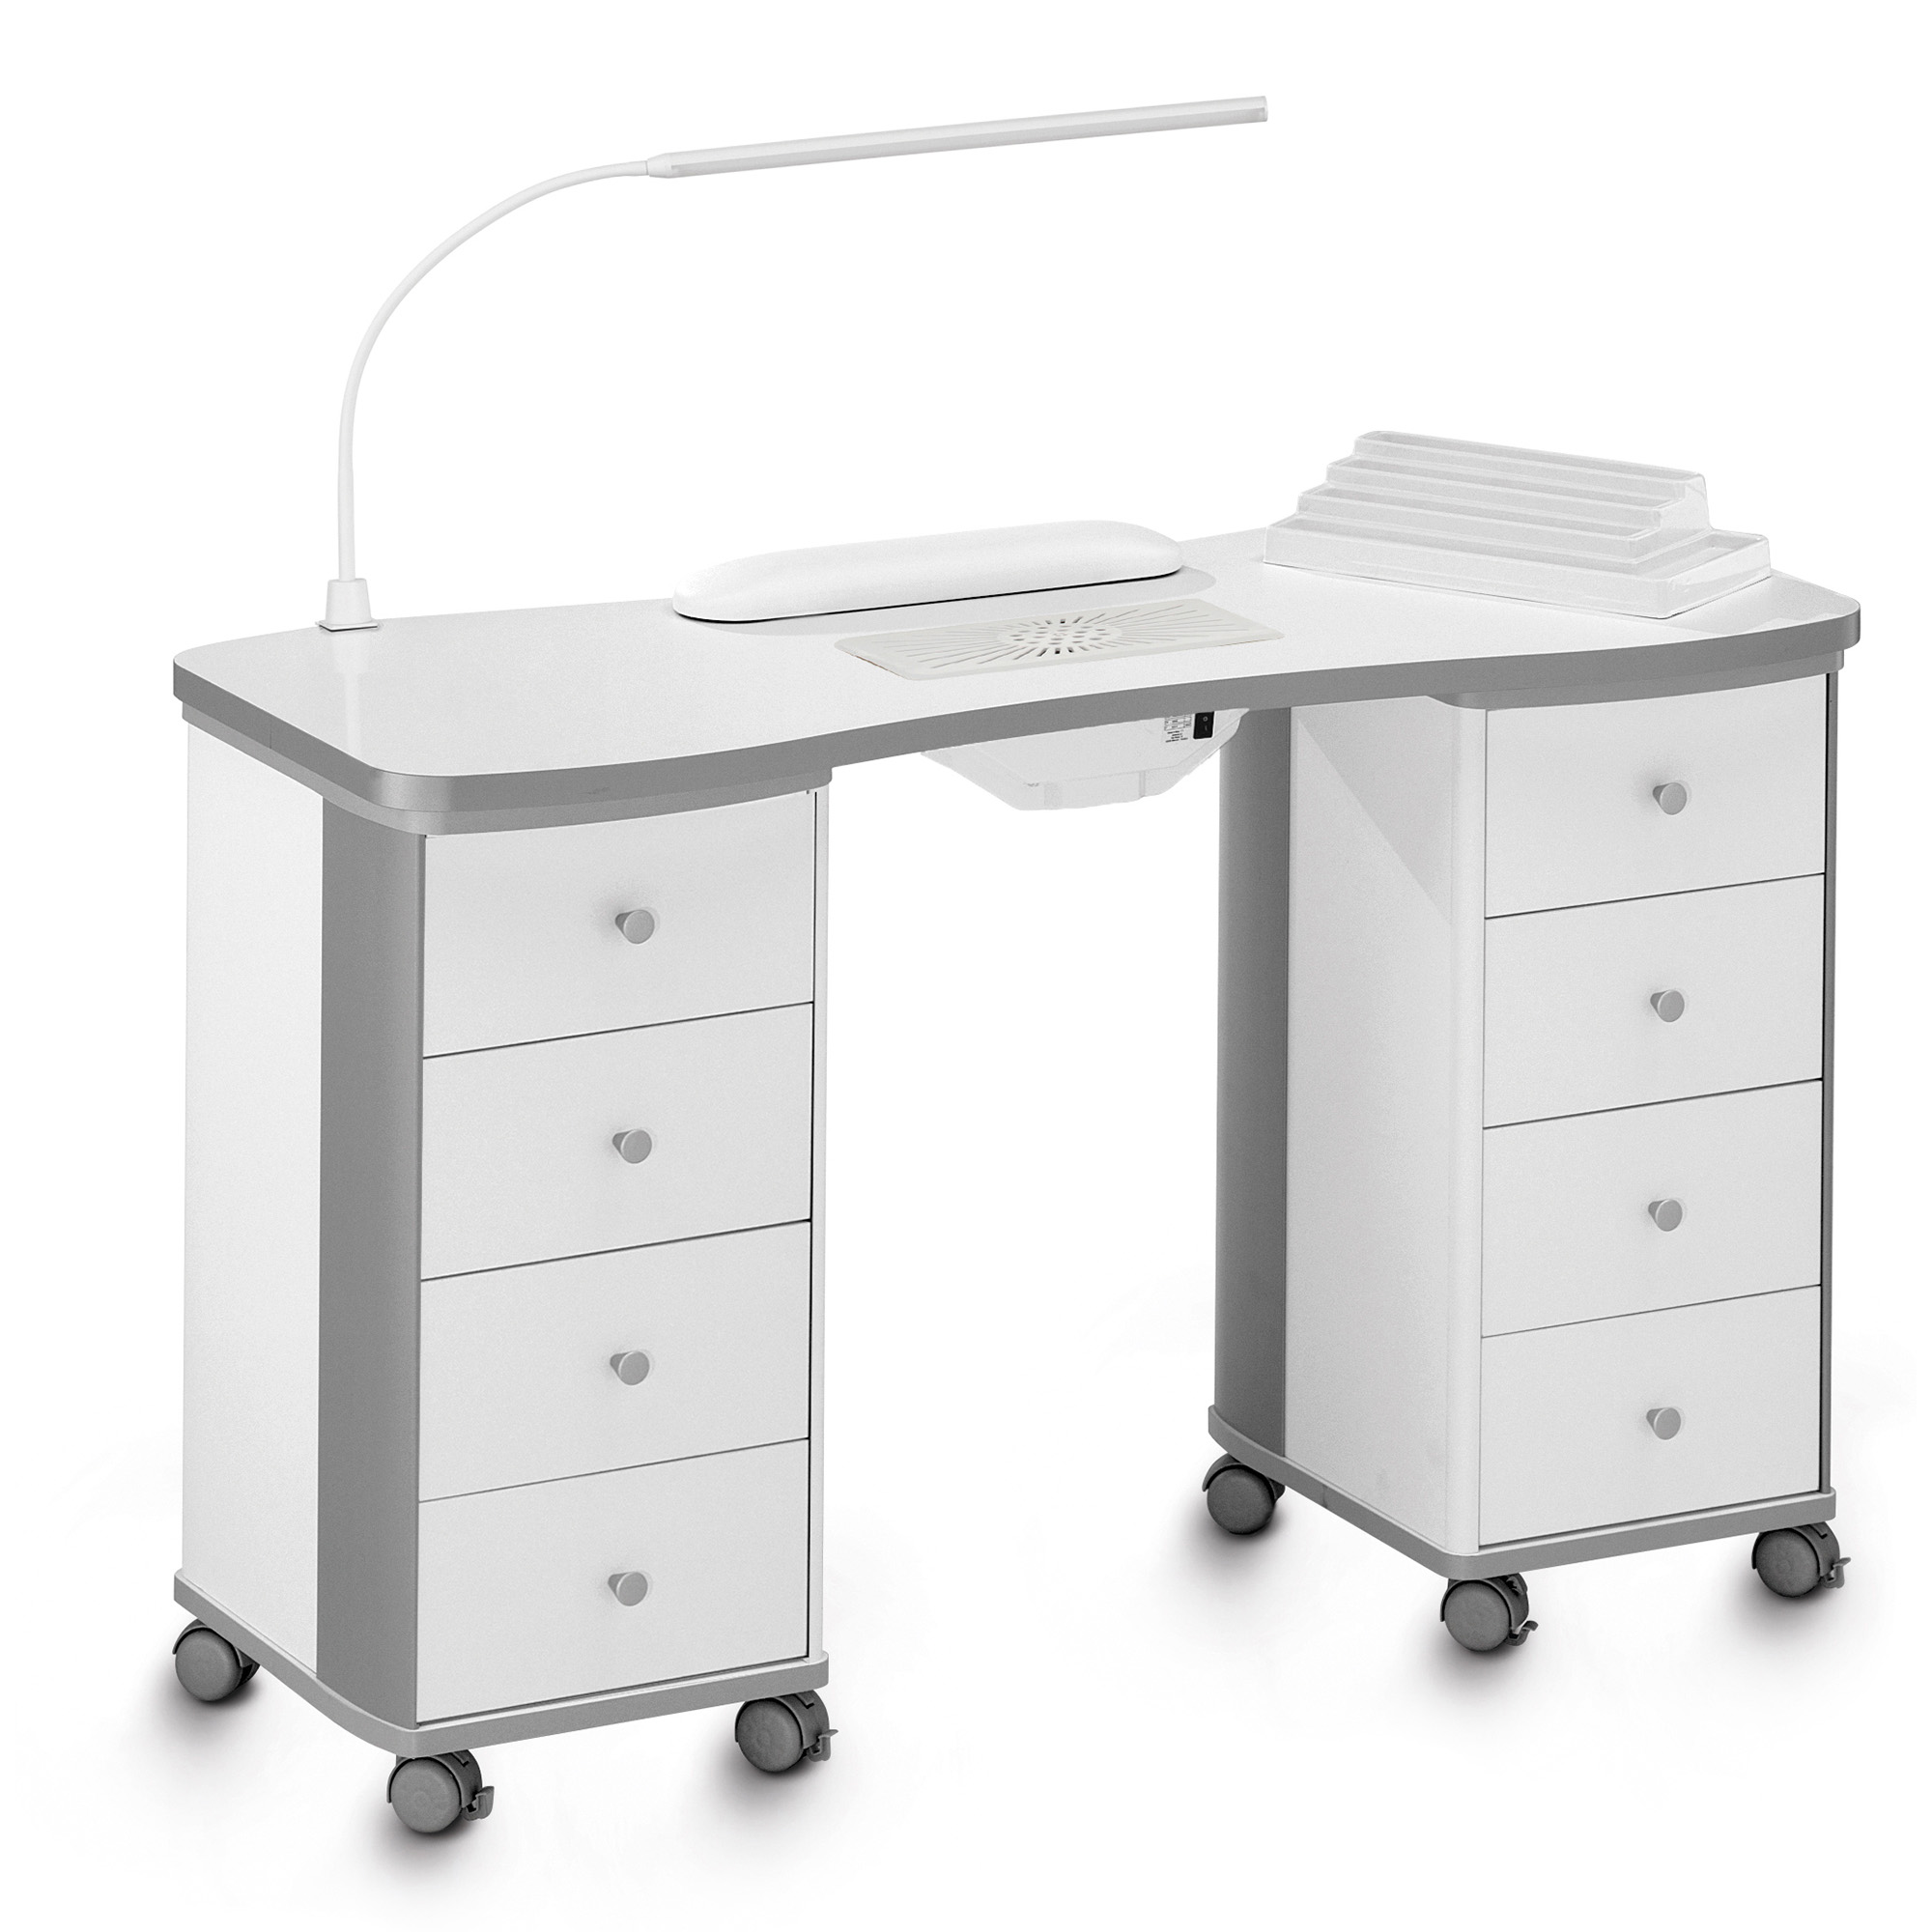 Ariel professional manicure table with suction unit, storage compartment, drawers and lamp